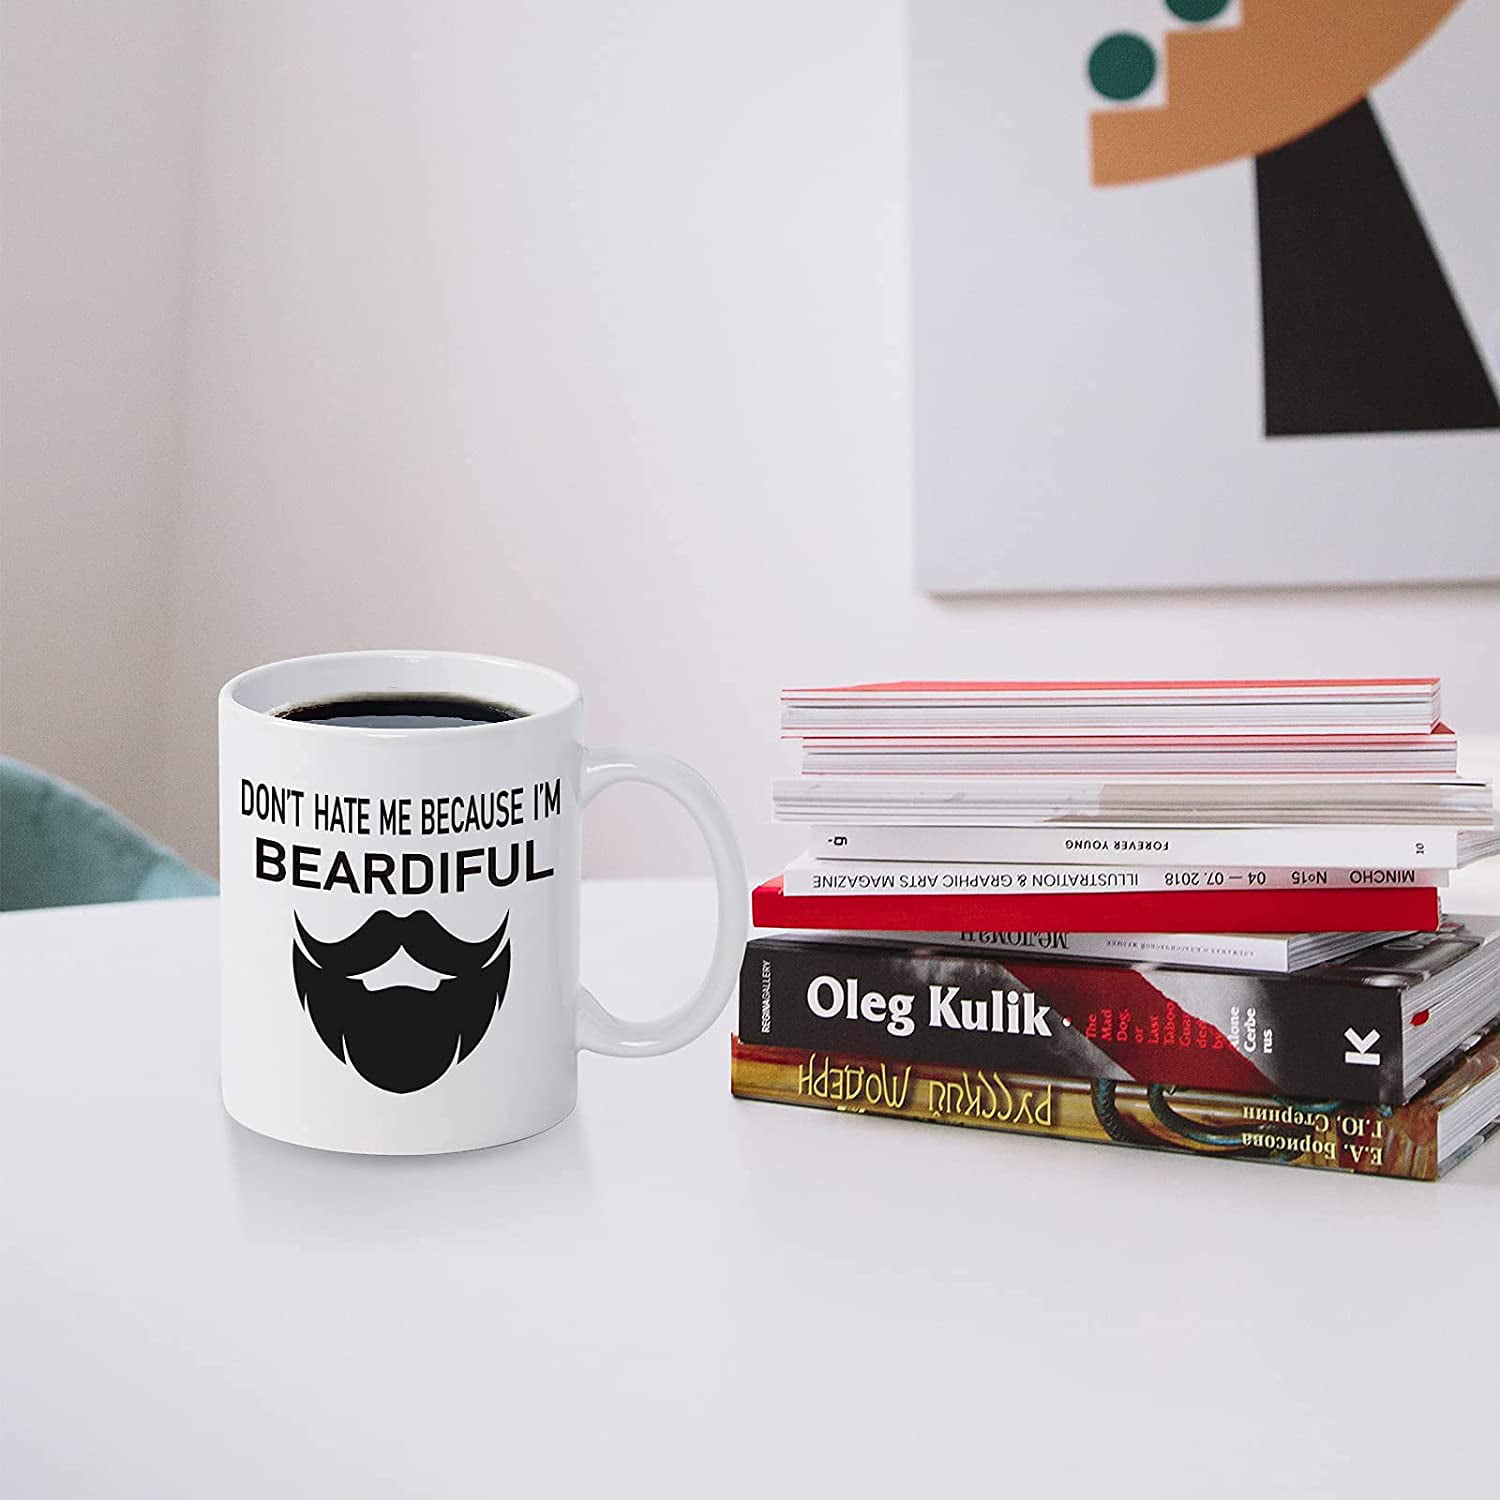 Funny Mugs for Men, Don't Hate Me Because I'm Beardiful Funny Coffee Mugs,  Coffee Cups for Men, Funny Beard Mugs, Manly Gifts for Men, Beard Gifts for